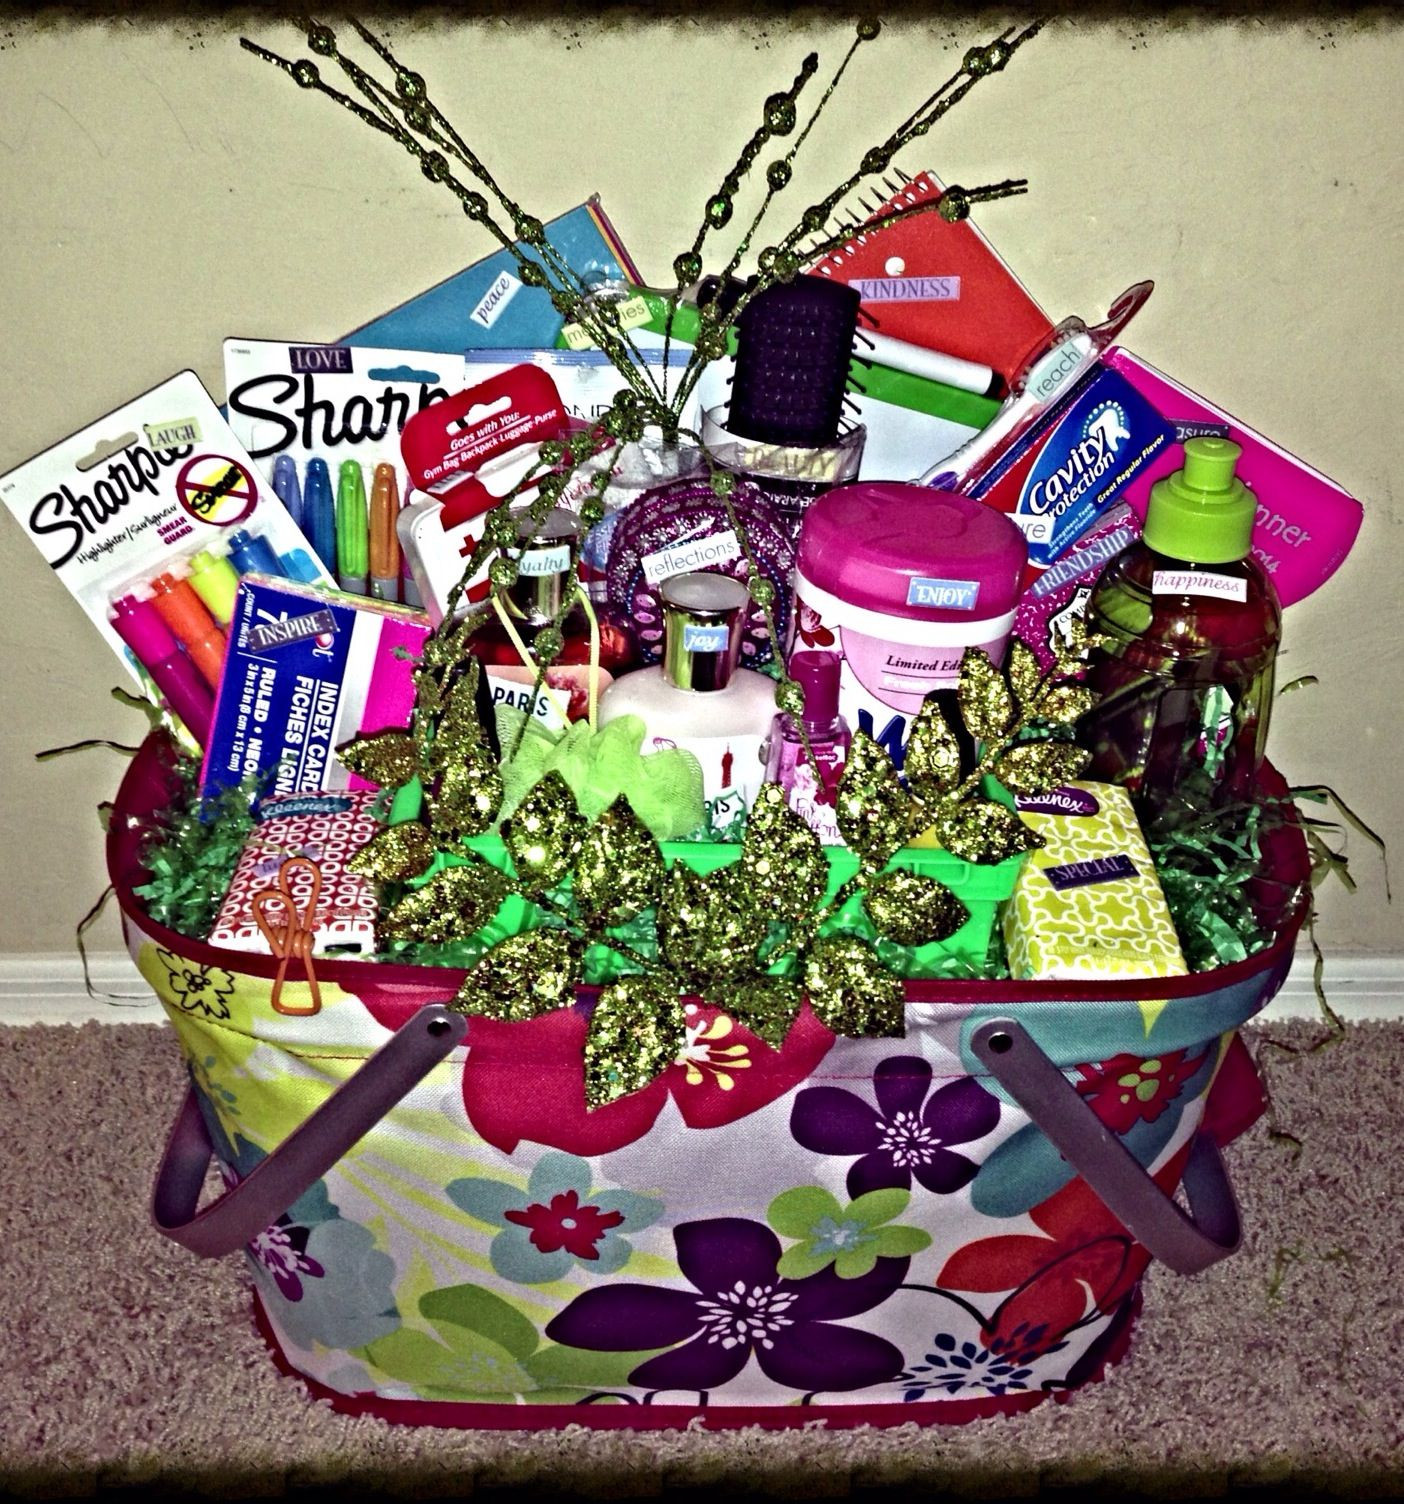 High School Graduation Gift Basket Ideas
 College Student Gift Basket for her This basket is